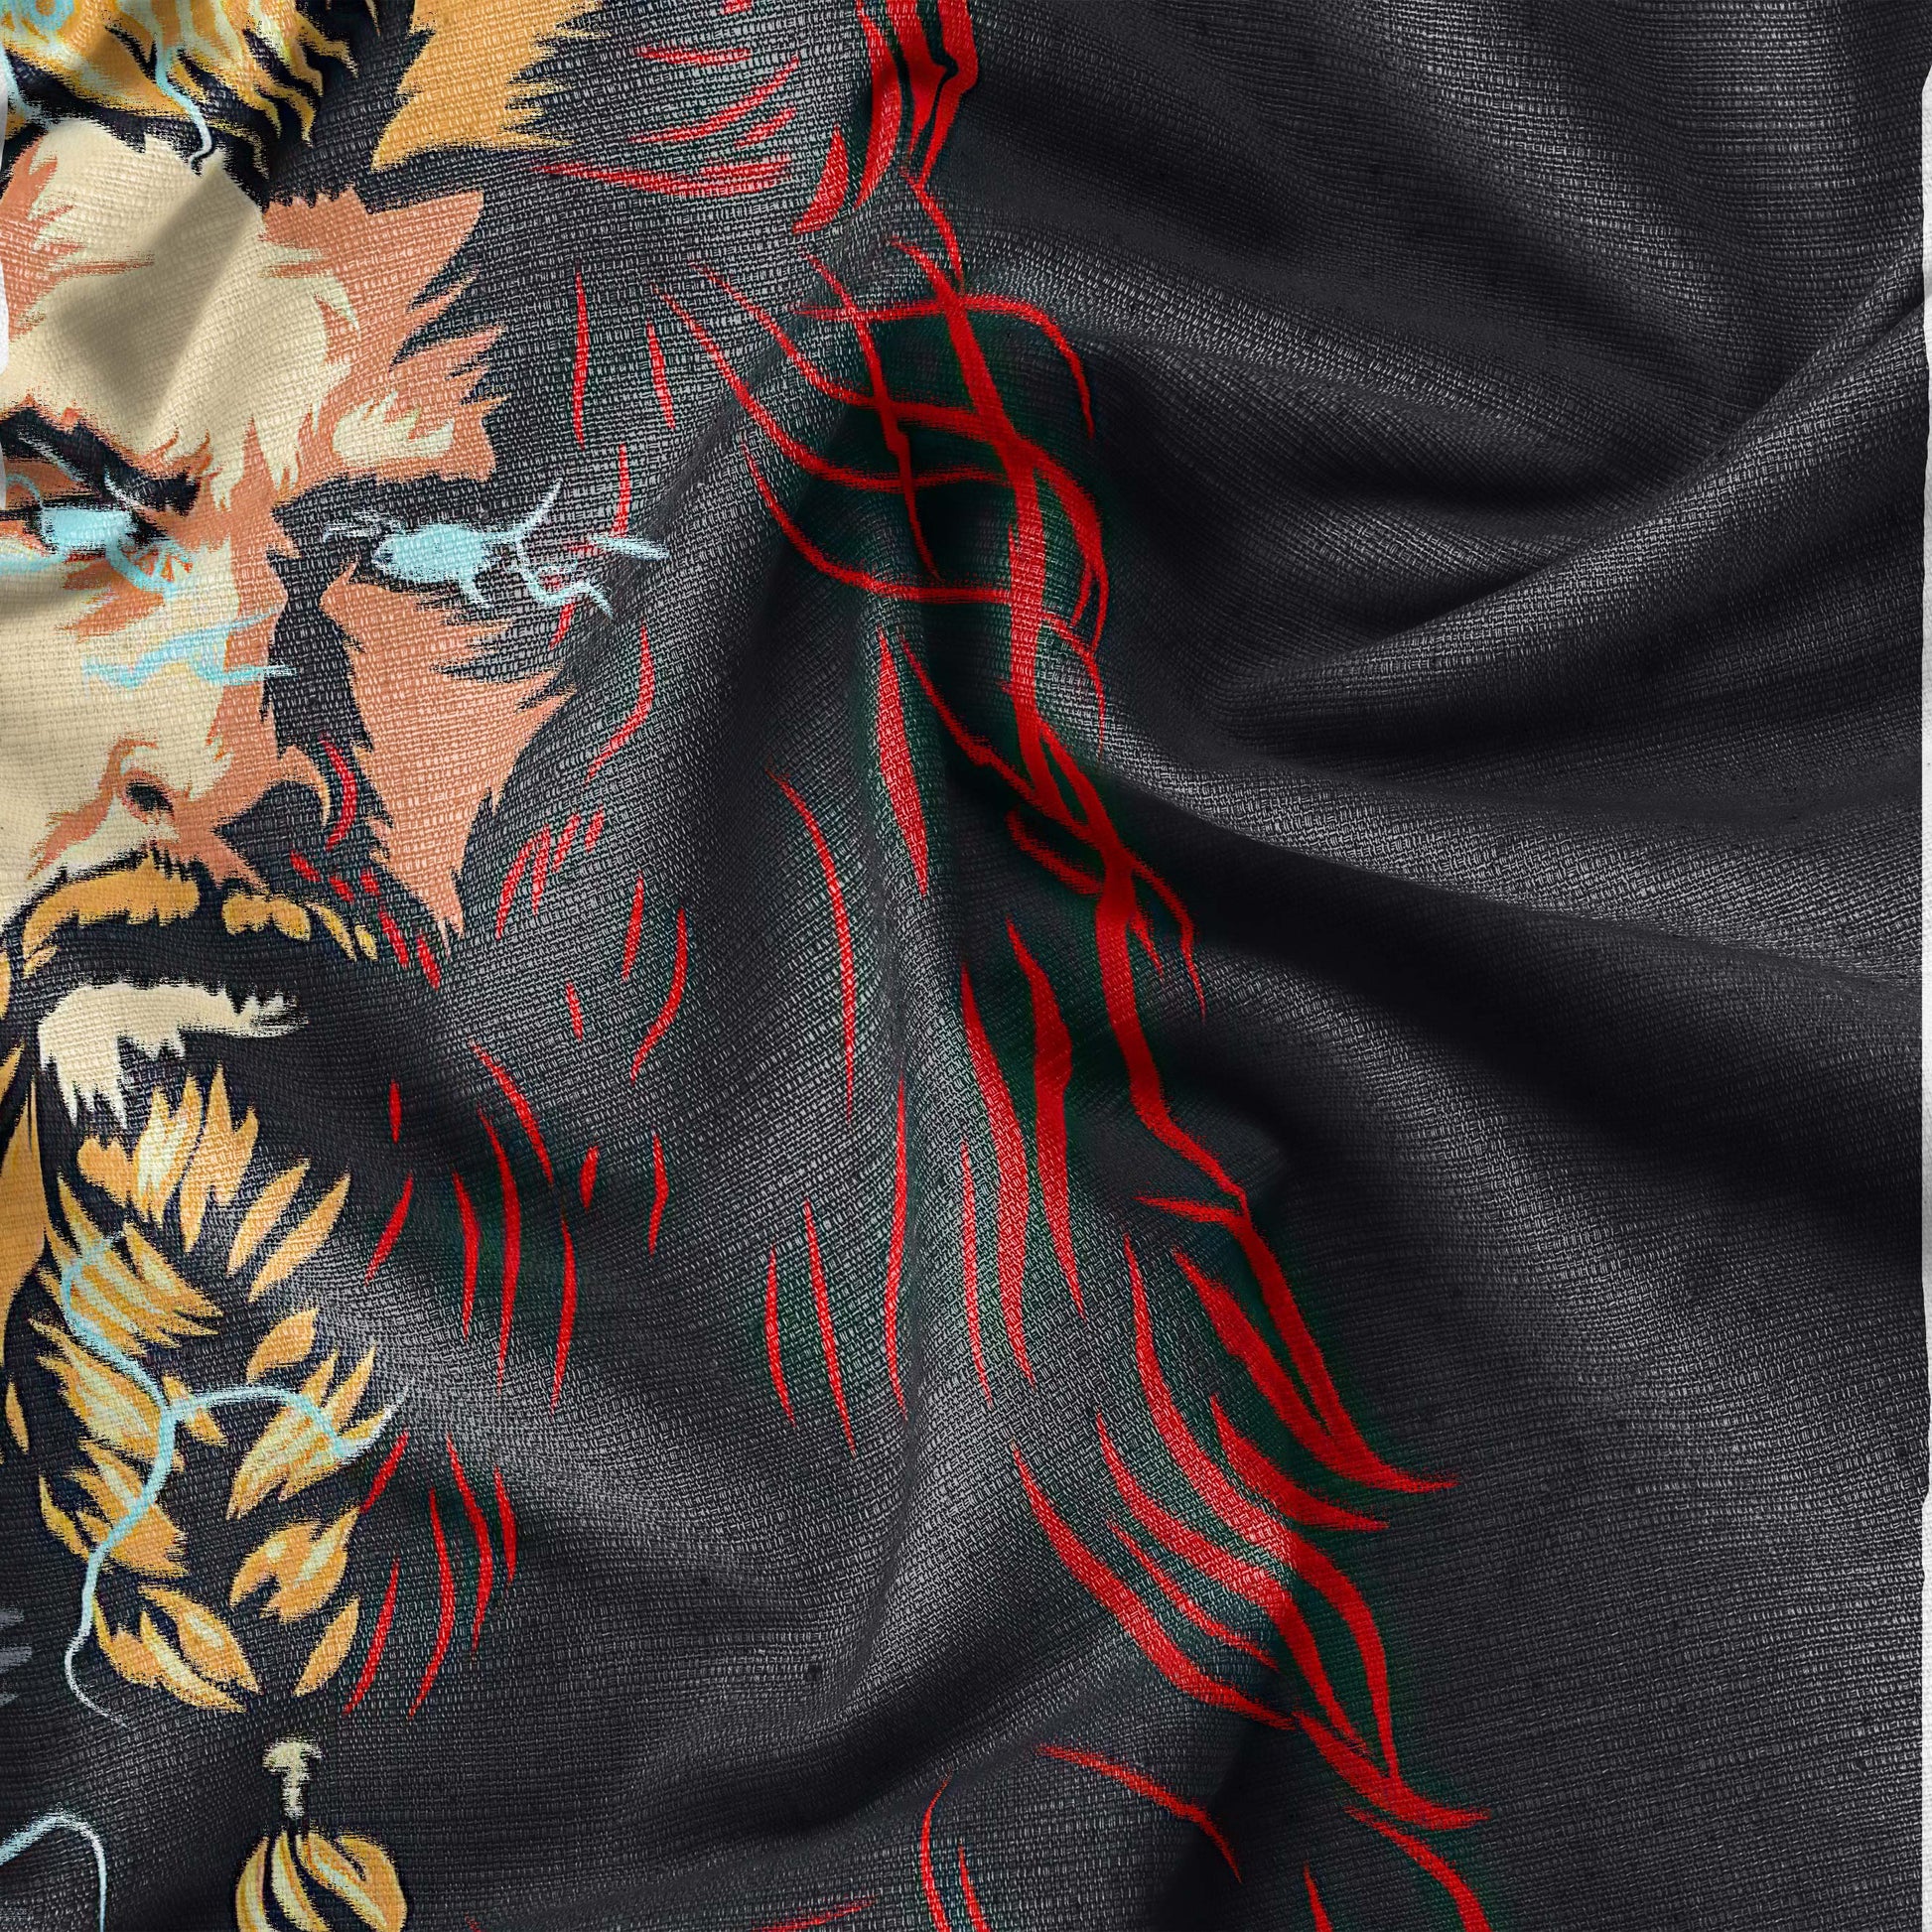 Thor Odinson Cushion Cover trendy home